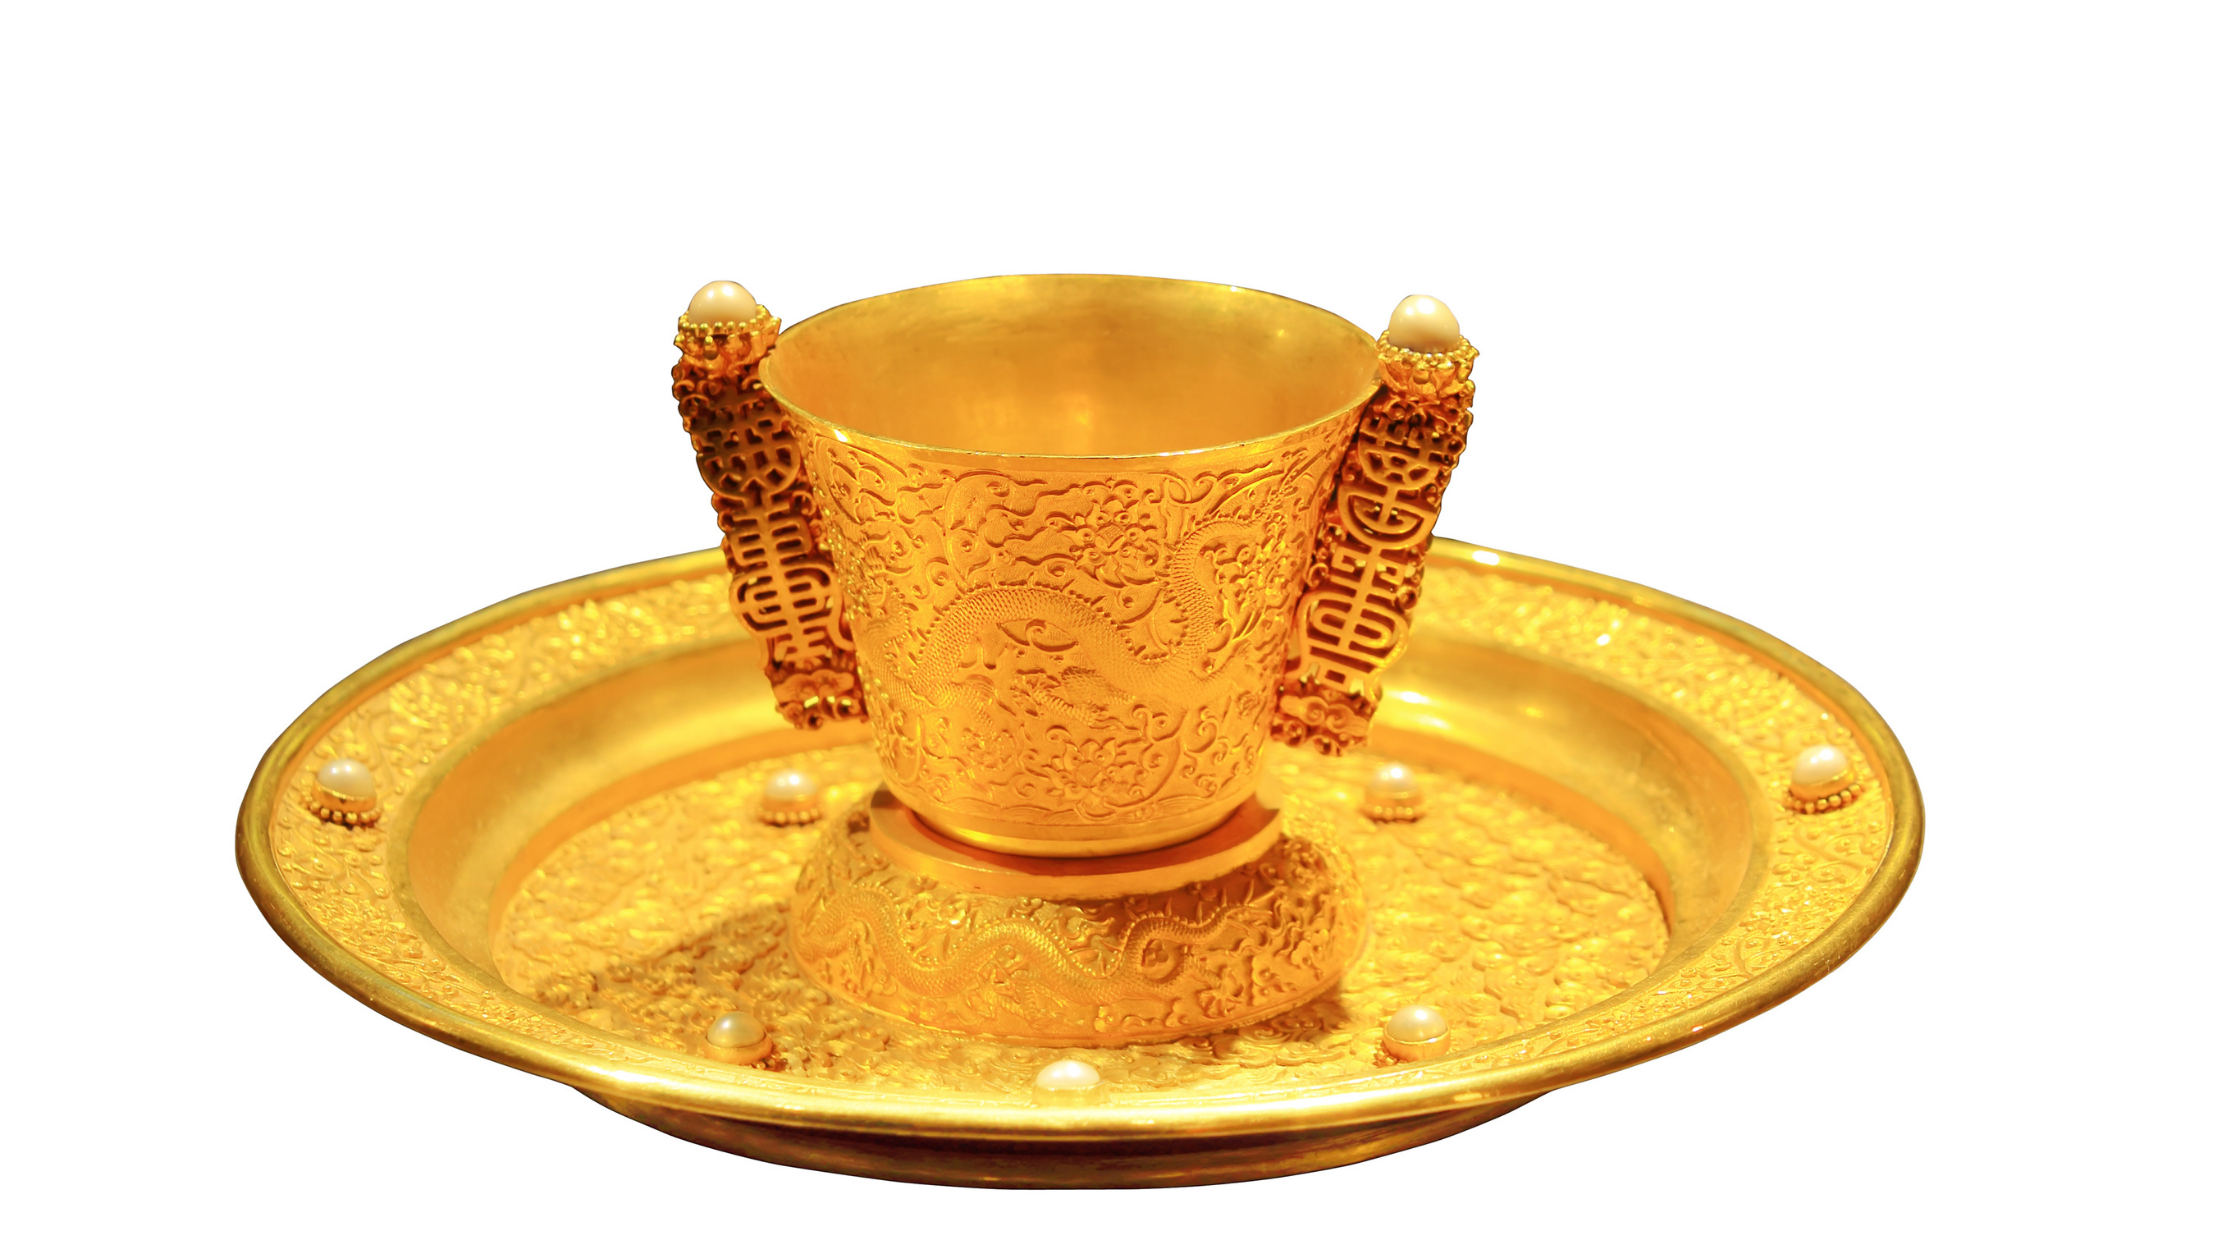 Chinese emperor's gold teacup